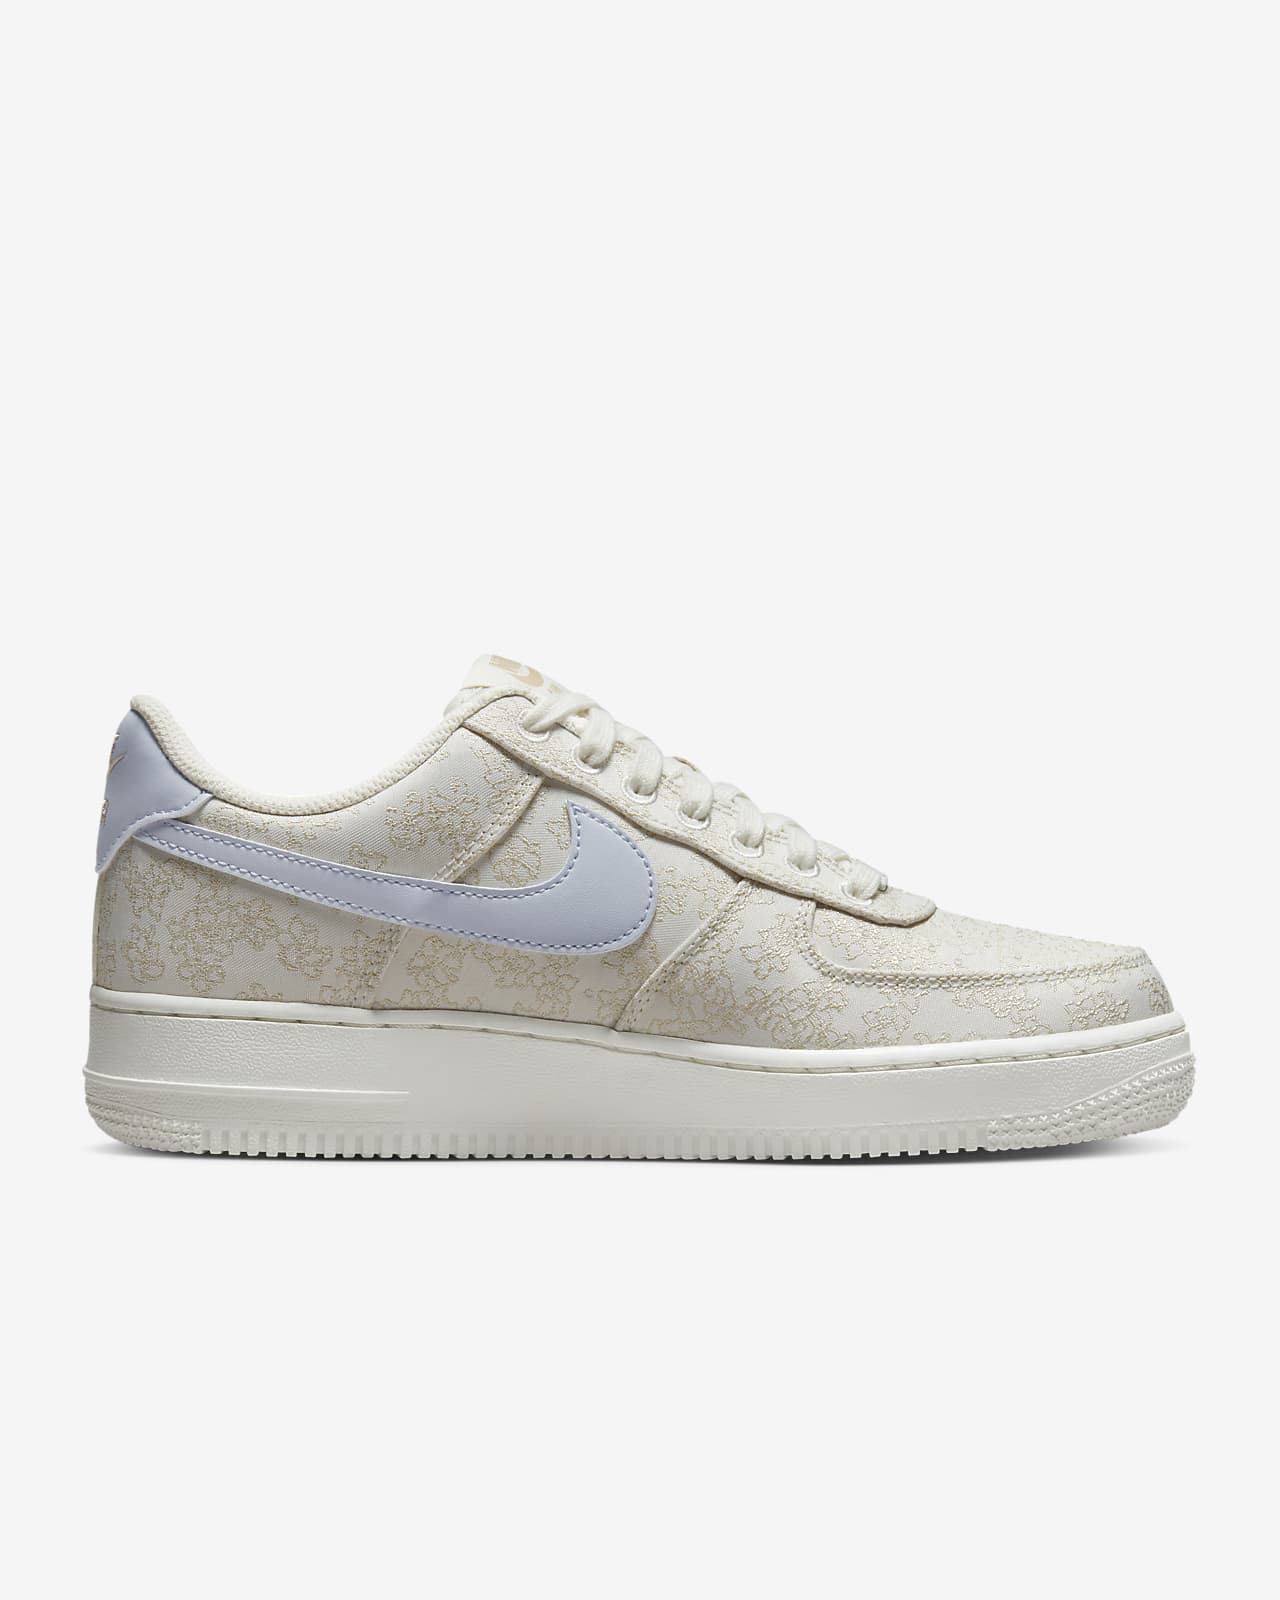 Nike Air Force 1 07 SE Womens Shoe Review